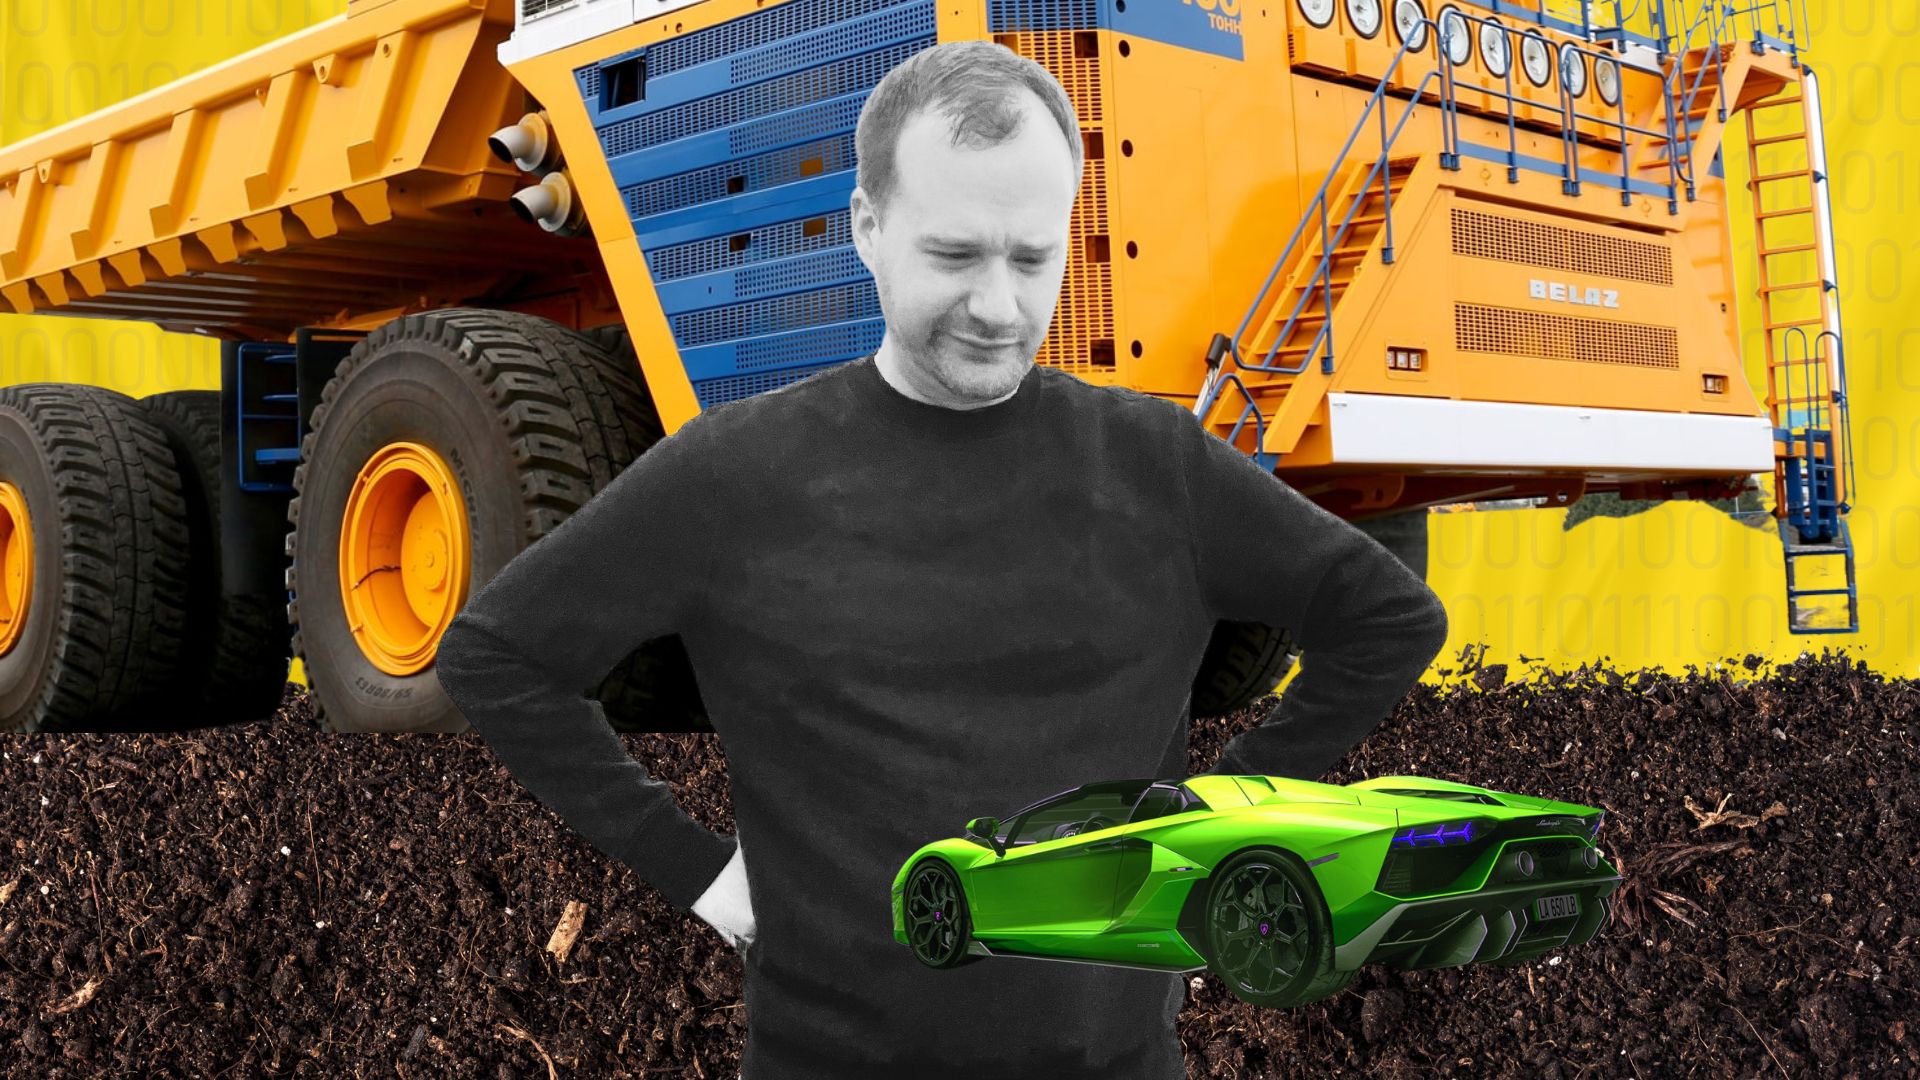 Jared Porcenaluk looking at two options: one a big dump truck, the other a sports car. Which makes sense to choose as a software engineer?